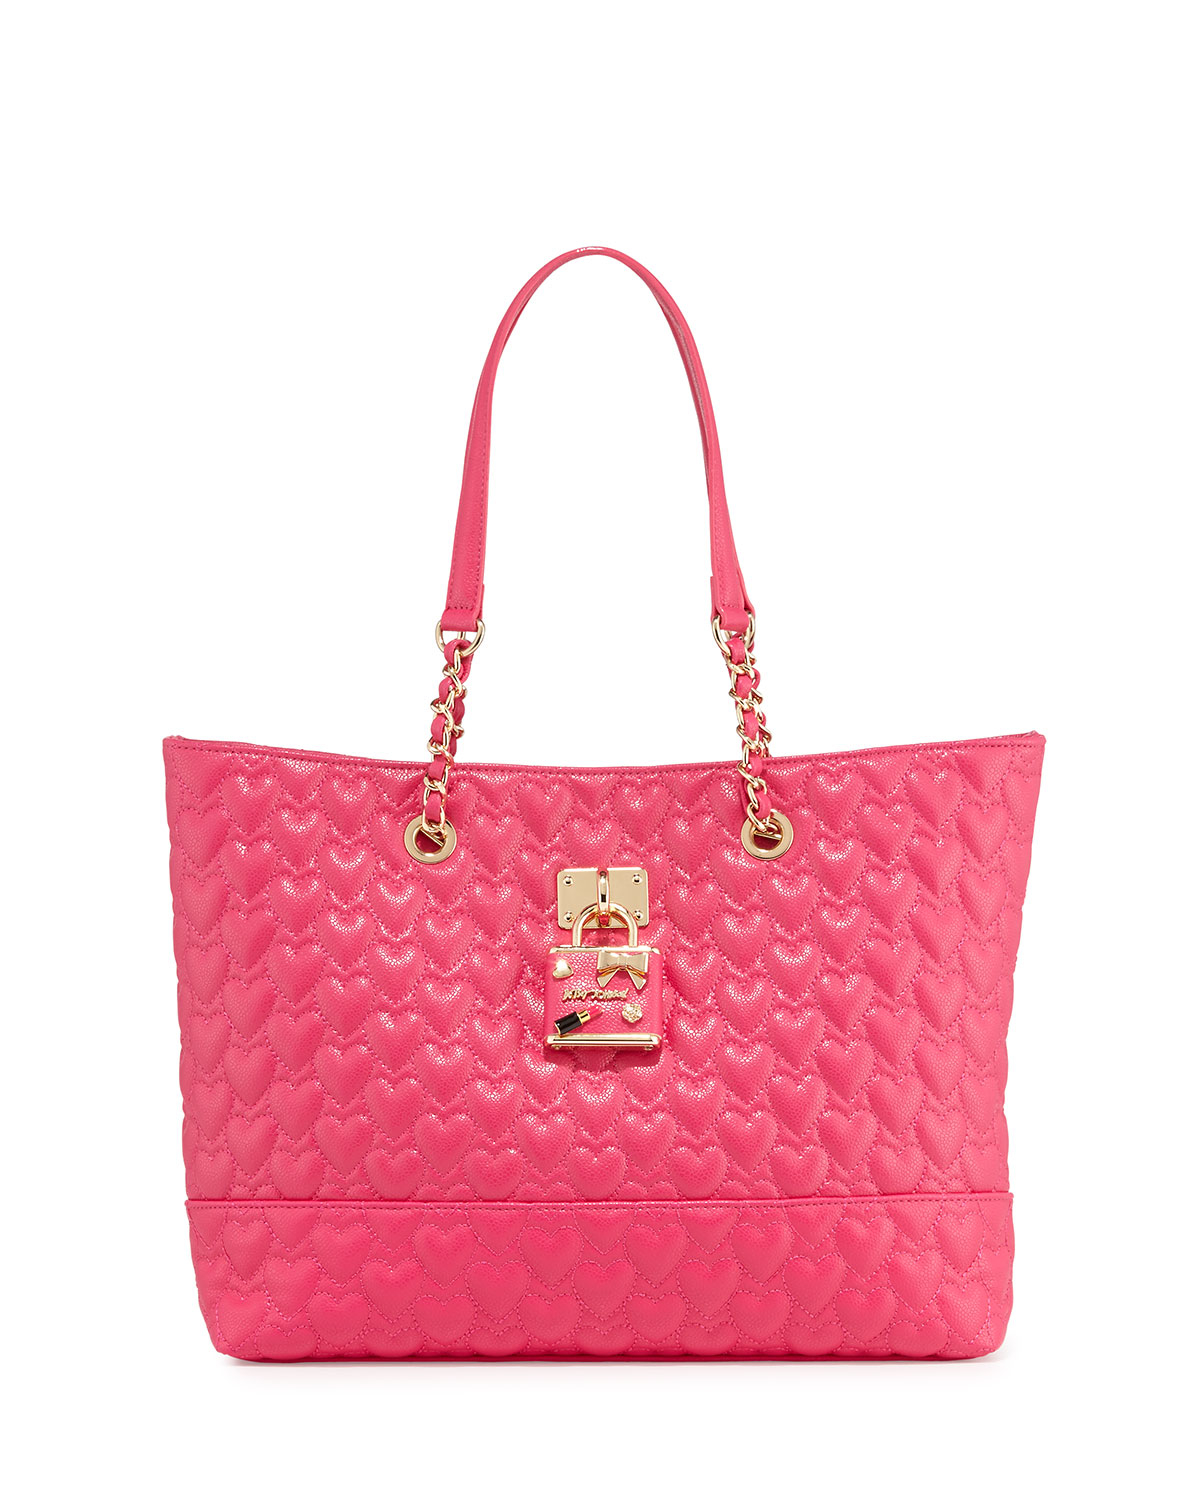 Betsey johnson Be My Baby Quilted Tote Bag in Pink | Lyst